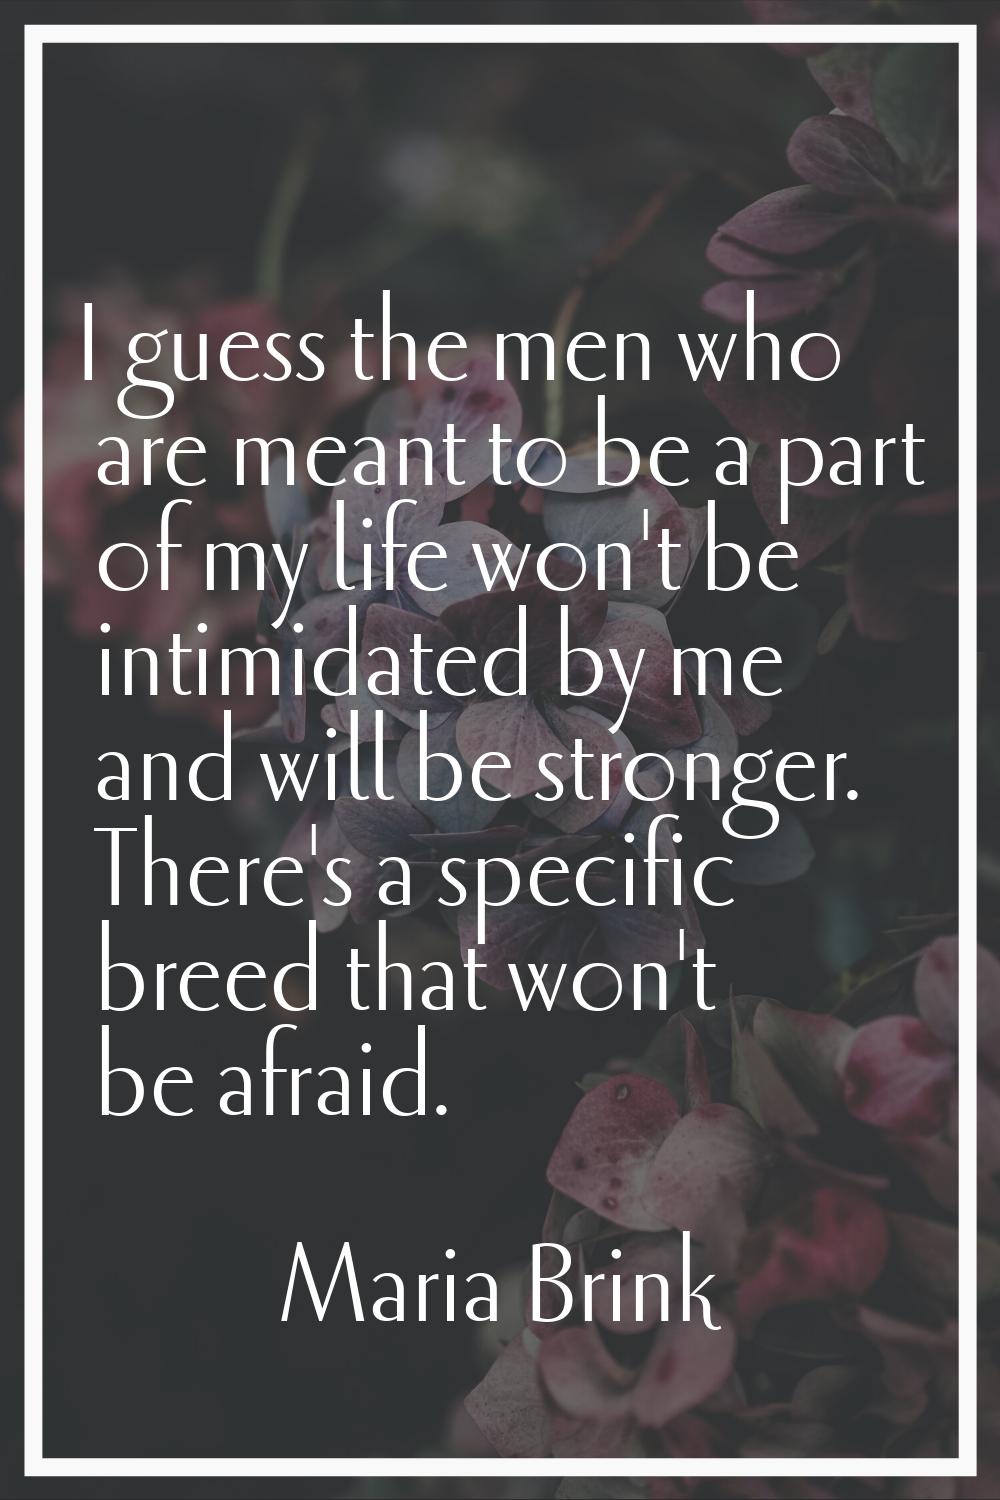 I guess the men who are meant to be a part of my life won't be intimidated by me and will be strong